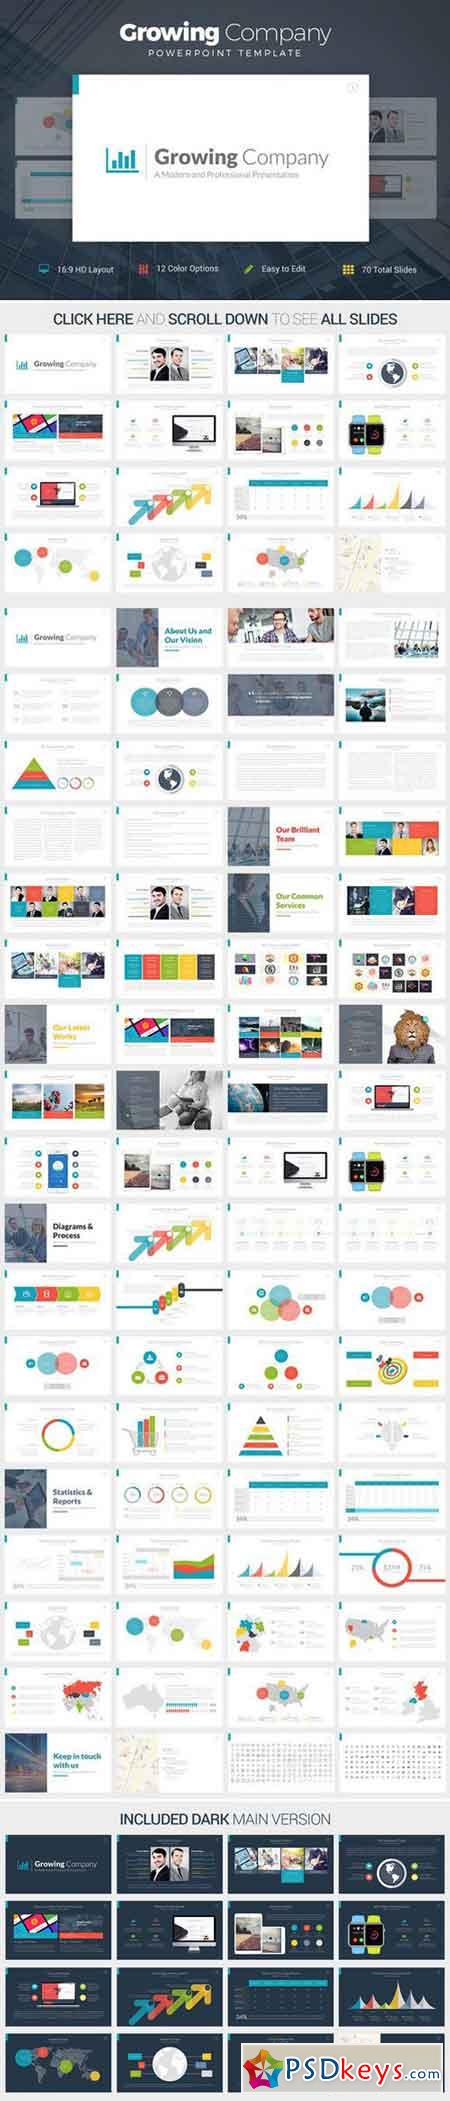 Growing Company PowerPoint Template 401412